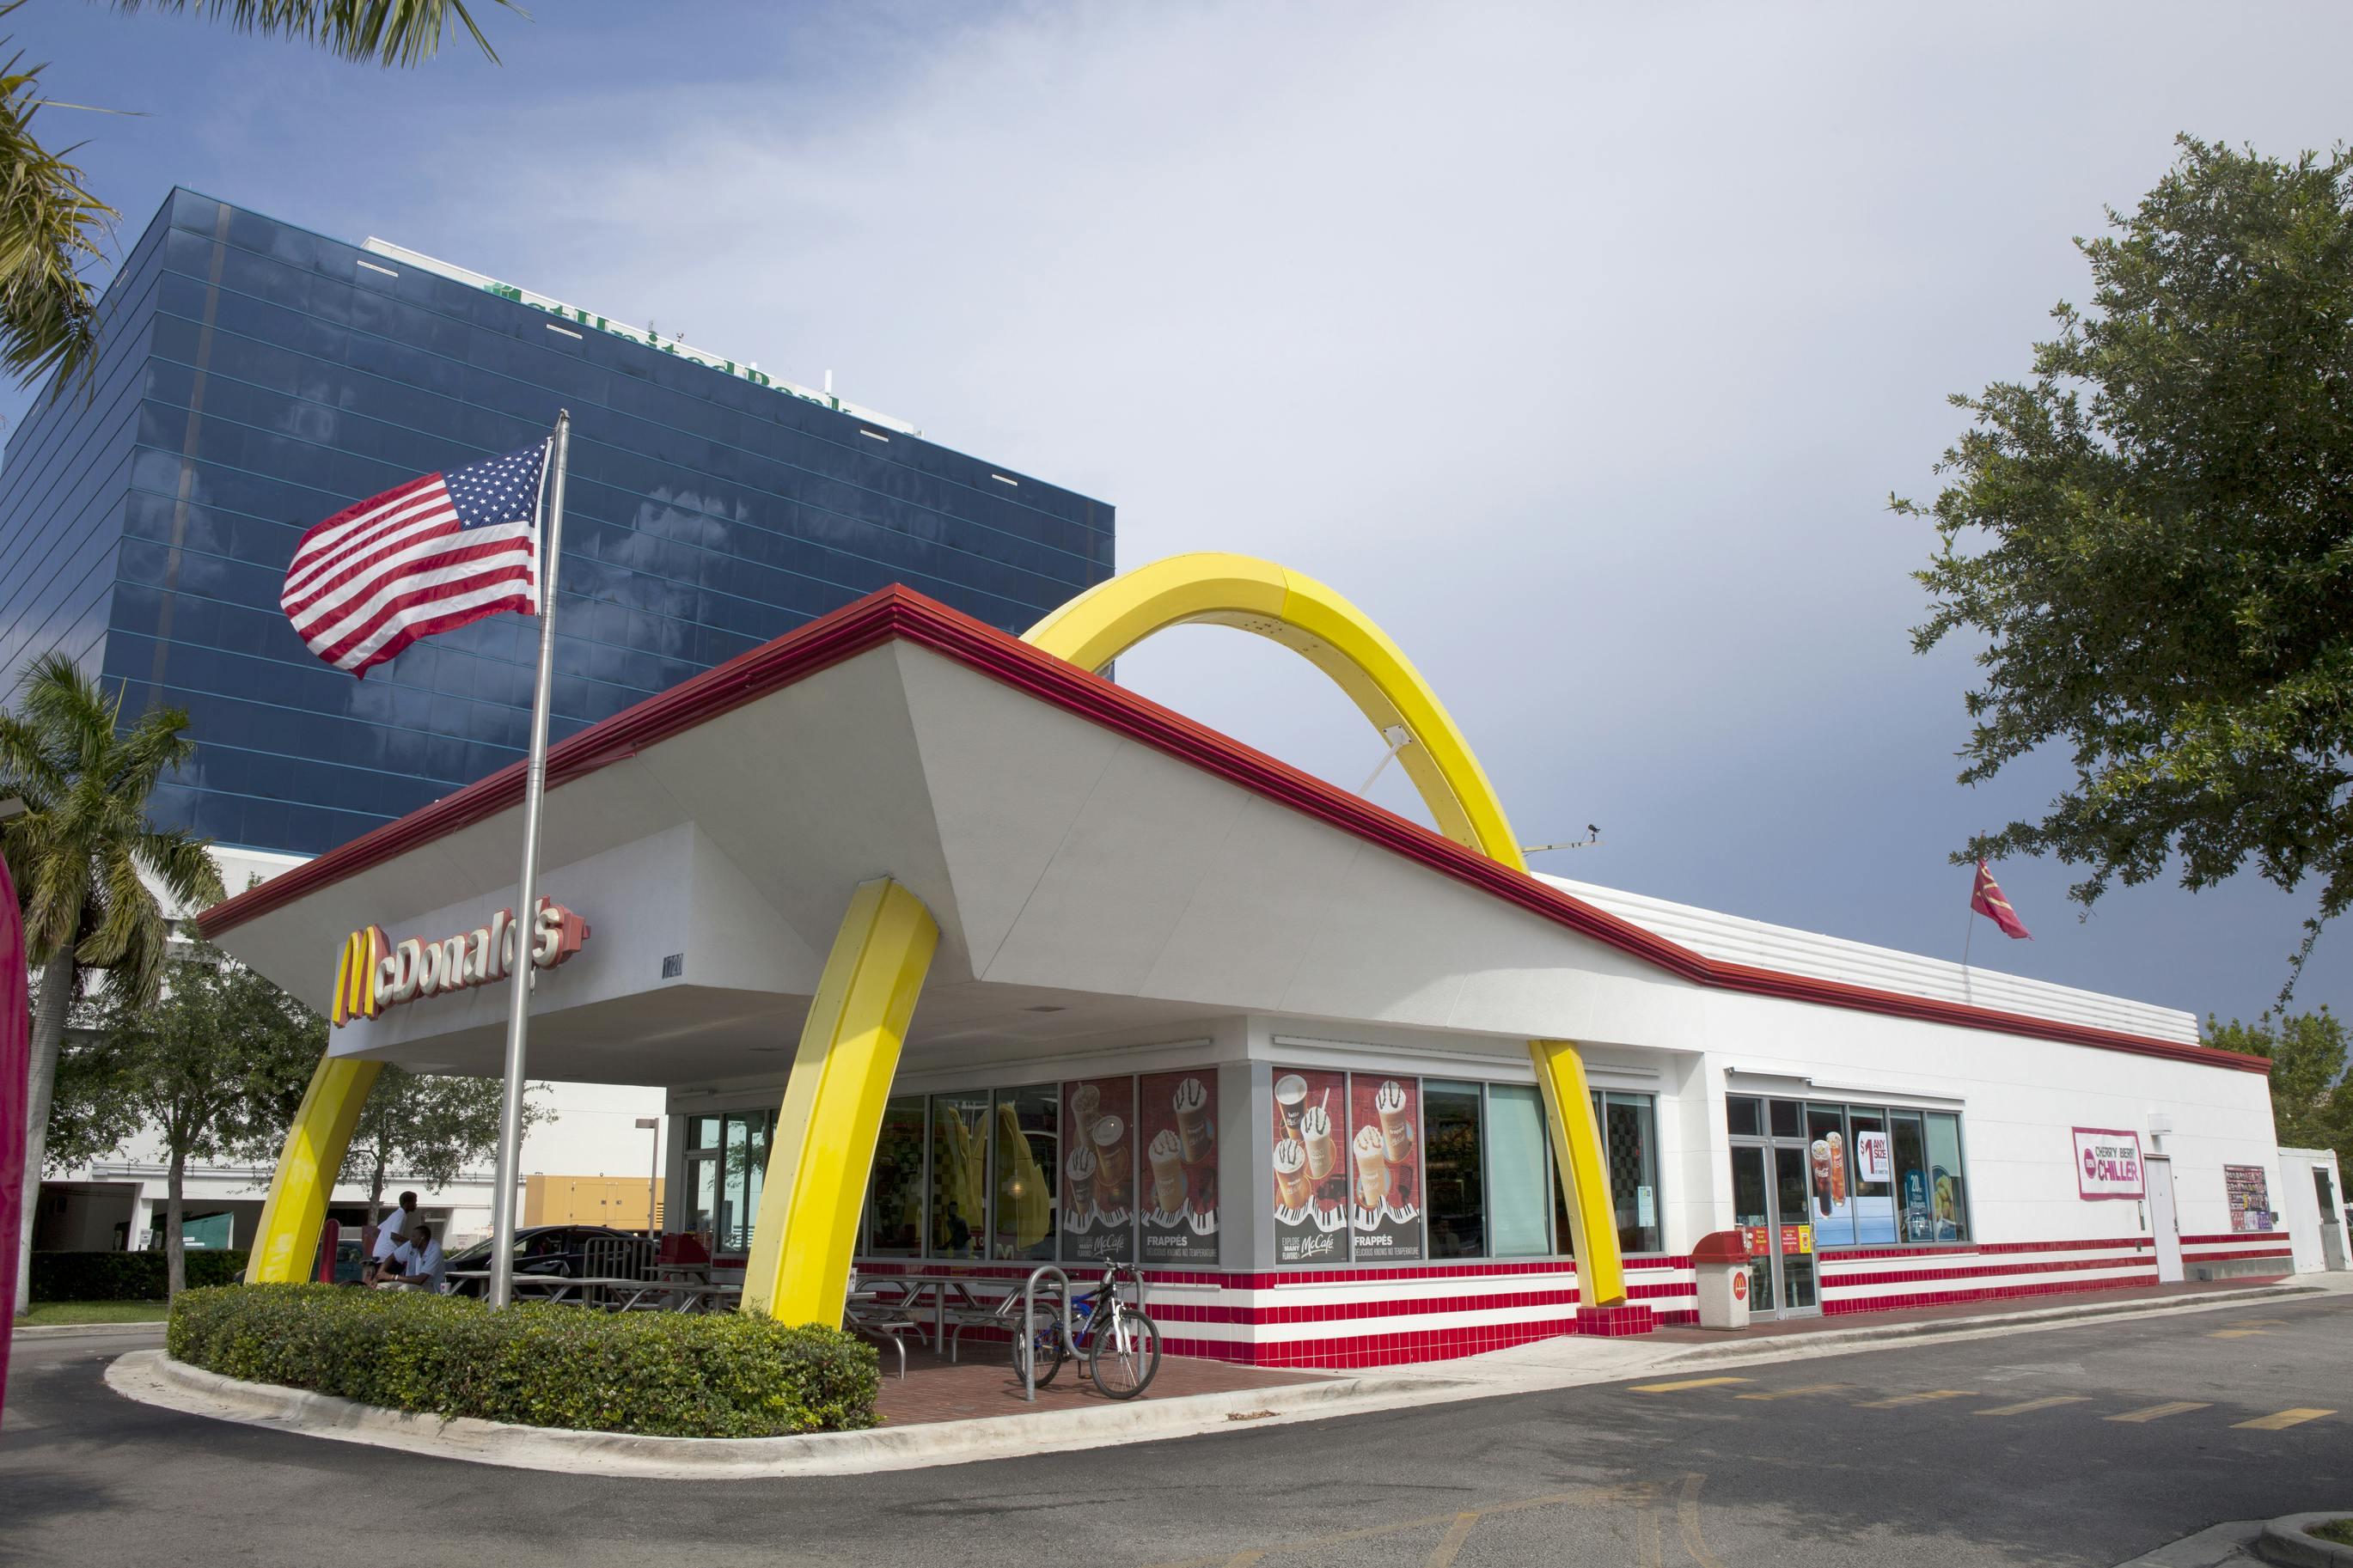 Exterior view of a McDonald's restaurant with an American flag out front.